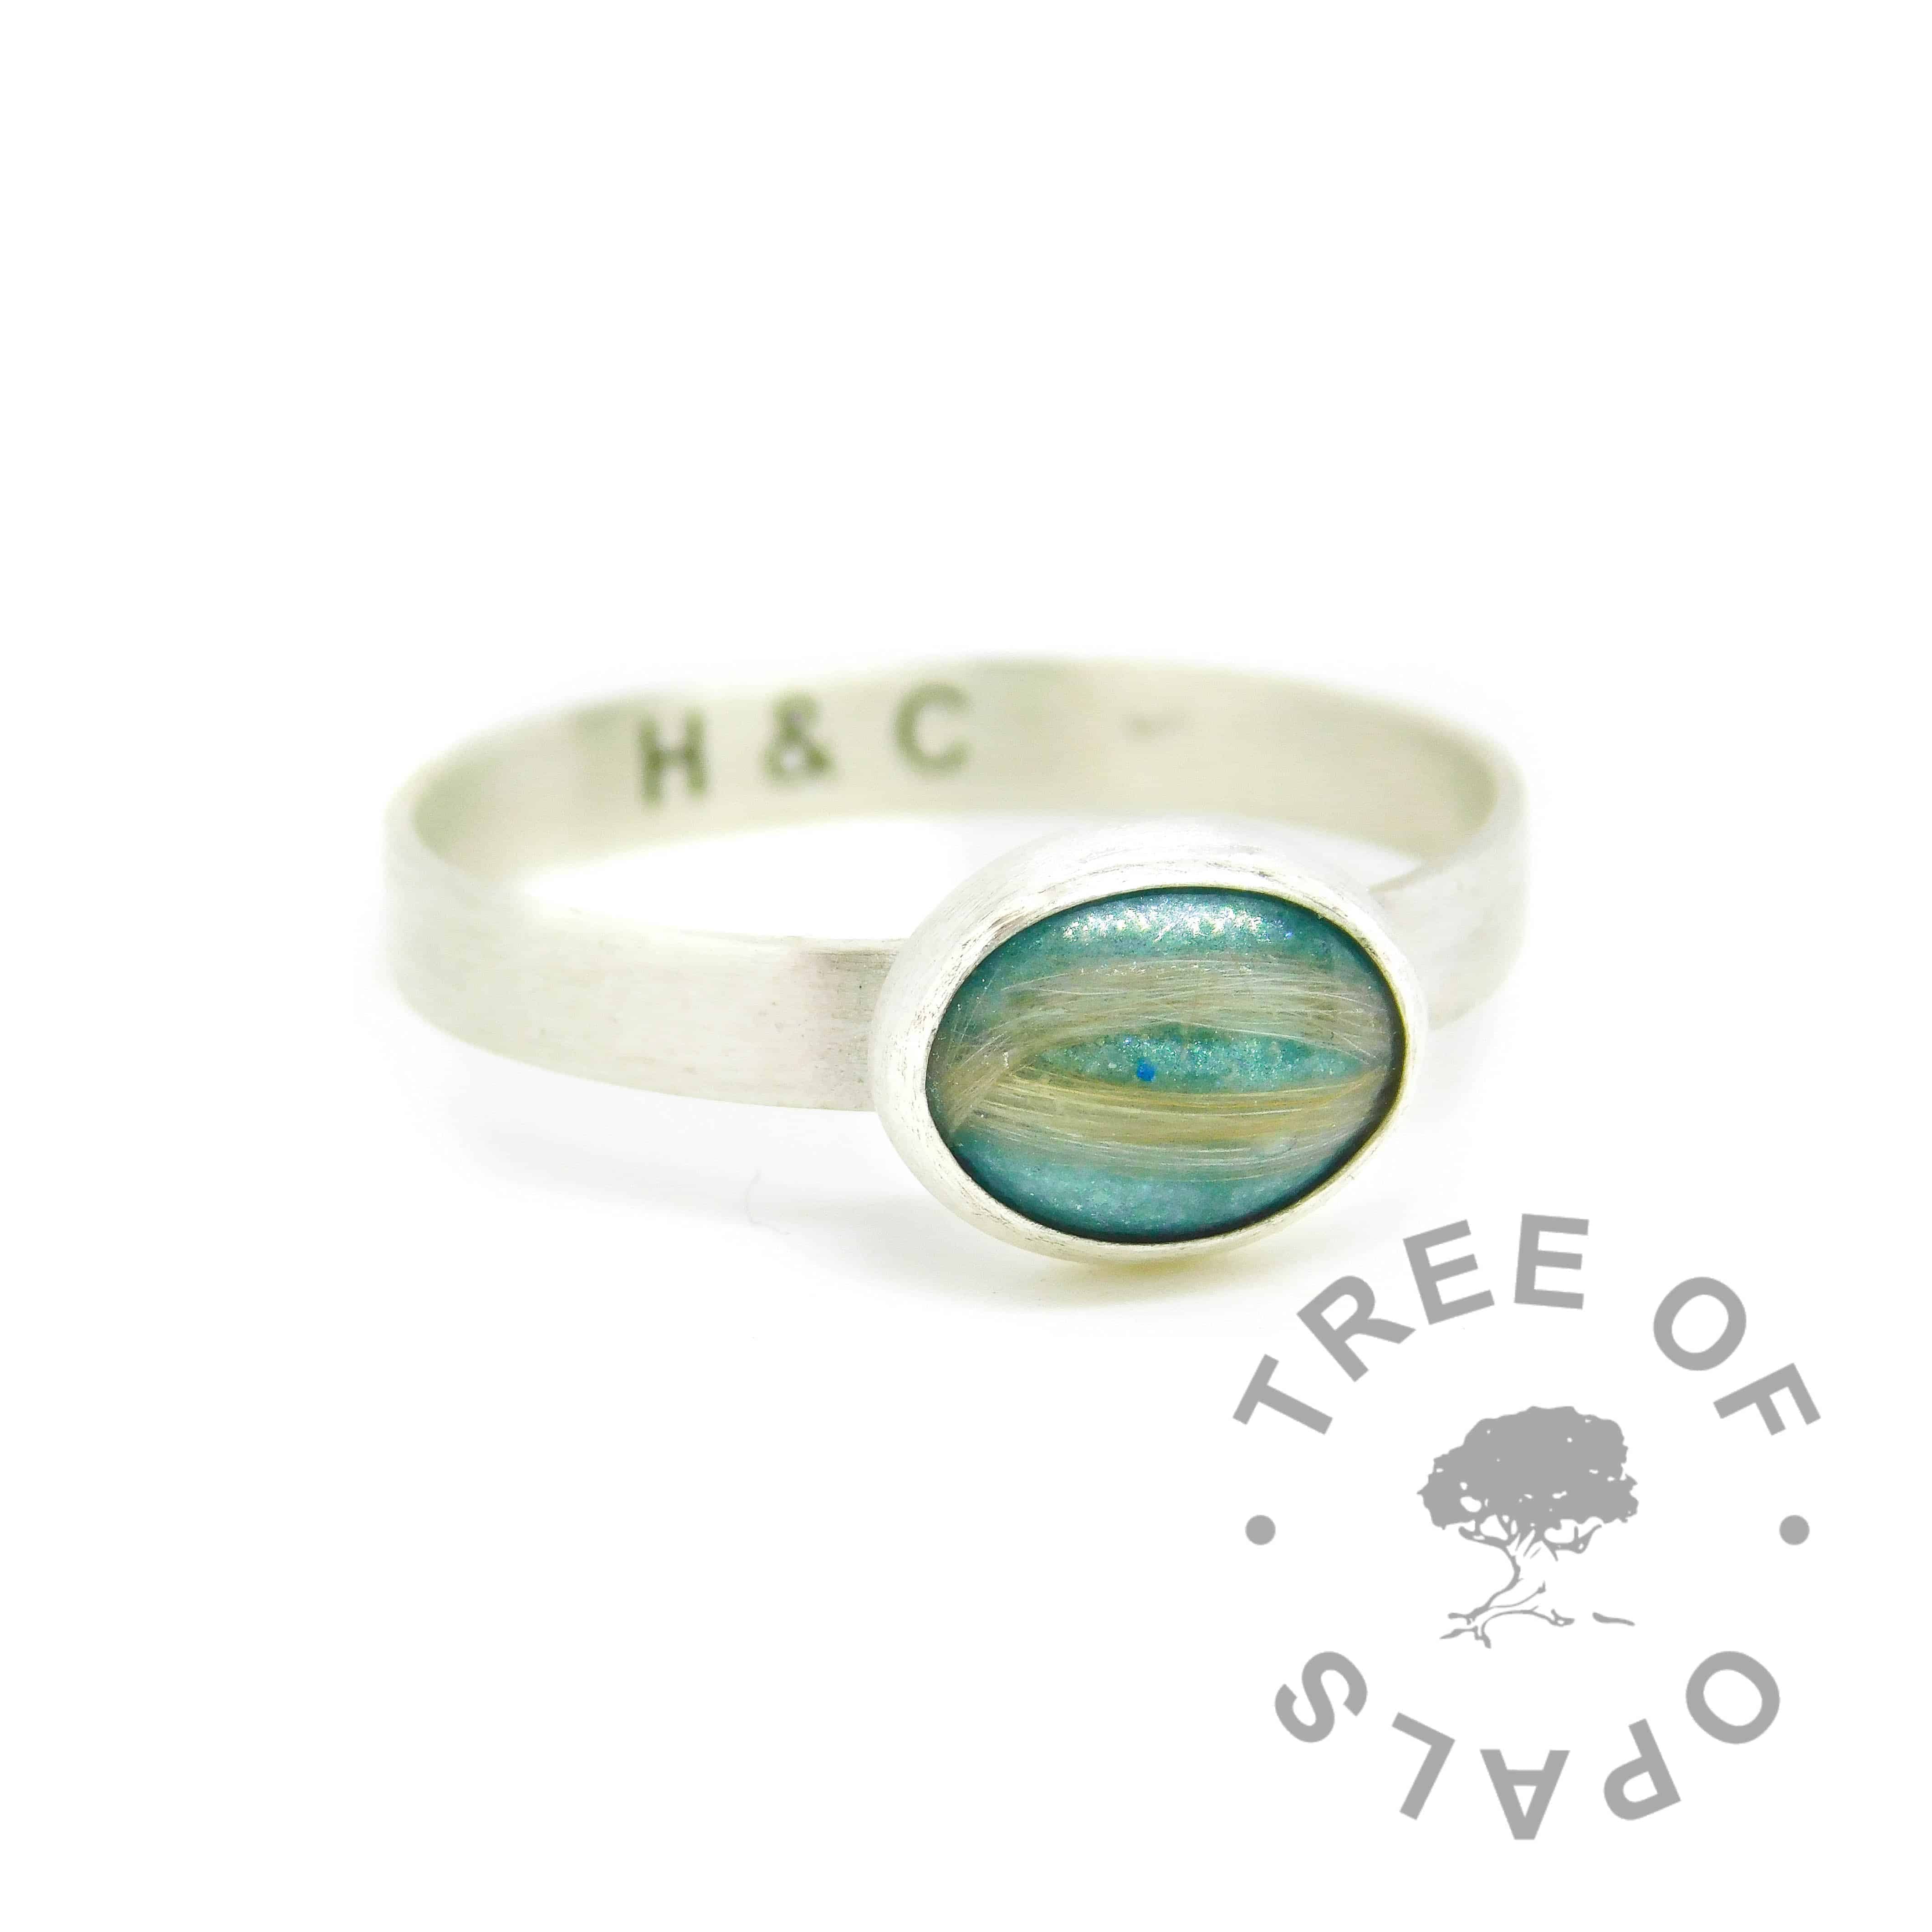 Fur ring with mermaid teal resin sparkle mix, no birthstone, two different dogs' fur. 925 stamped 3mm wide handmade brushed ring band (matte) and 10x8mm bezel cup, handmade with solid sterling EcoSilver. Initials engraved inside in Arial font. Watermarked copyright Tree of Opals memorial jewellery image